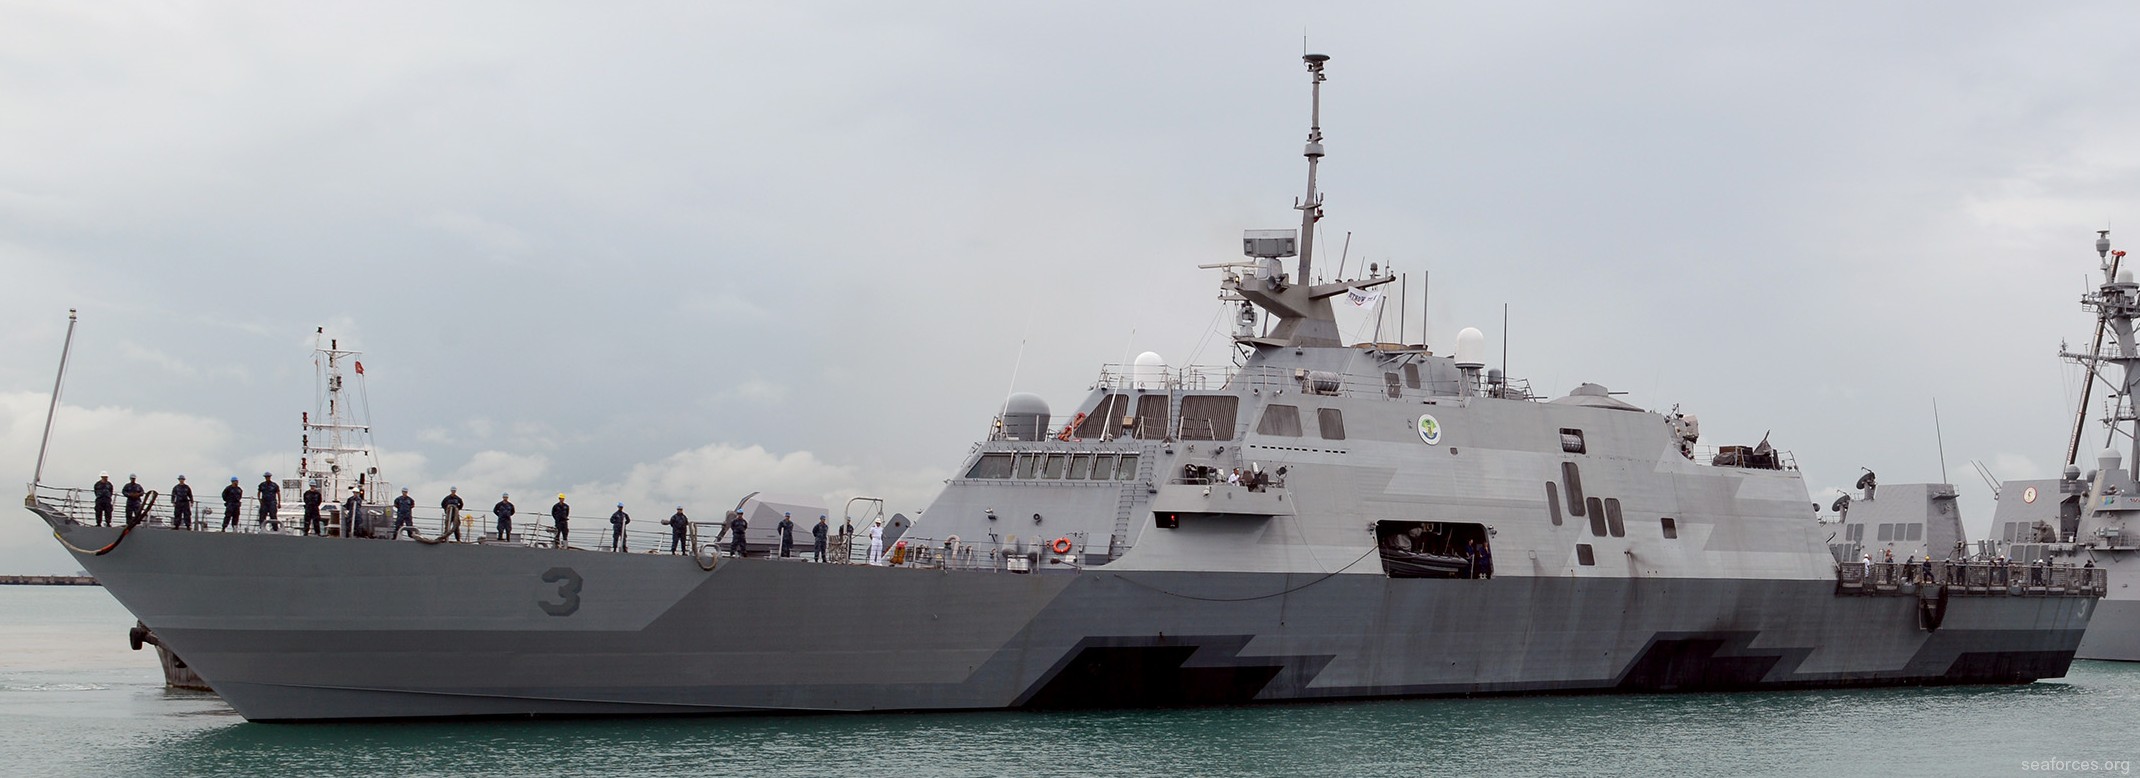 lcs-3 uss fort worth littoral combat ship freedom class us navy 28